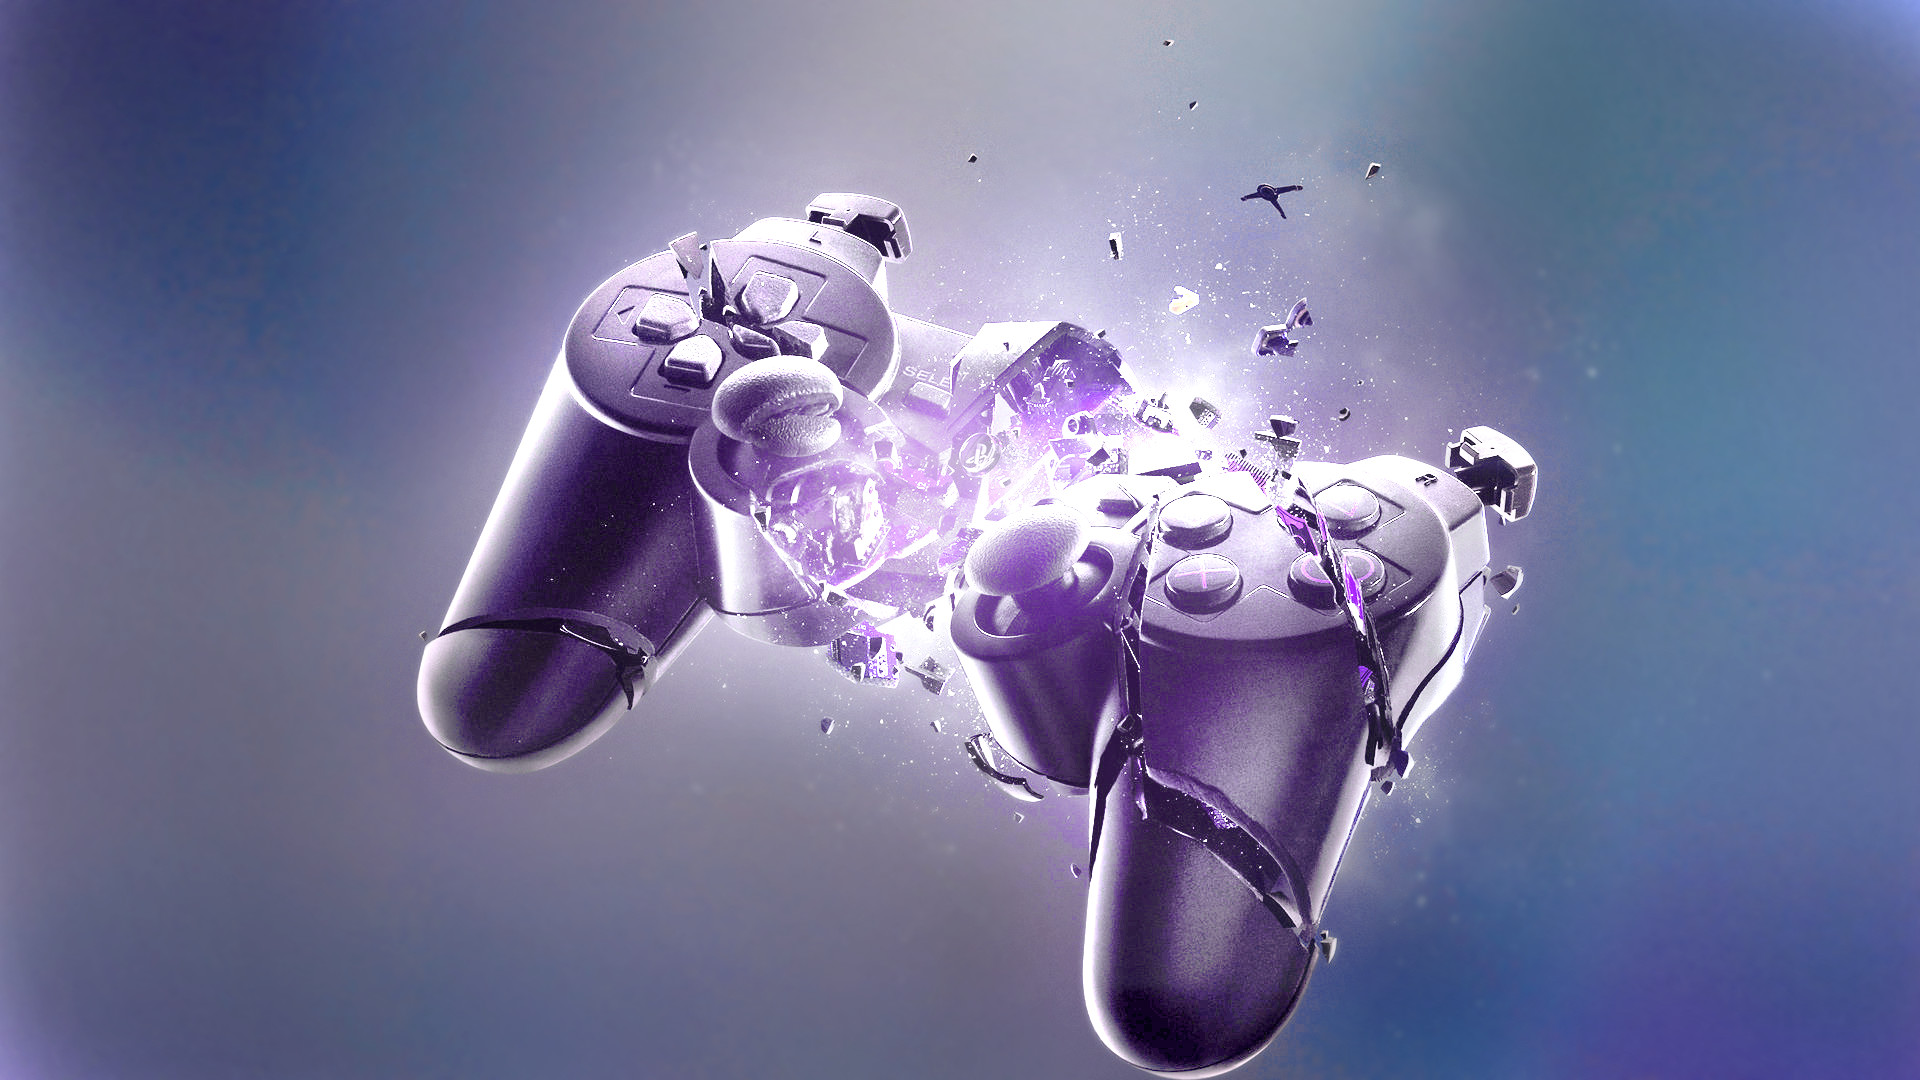 Playstation 3 Controller 1920x1080